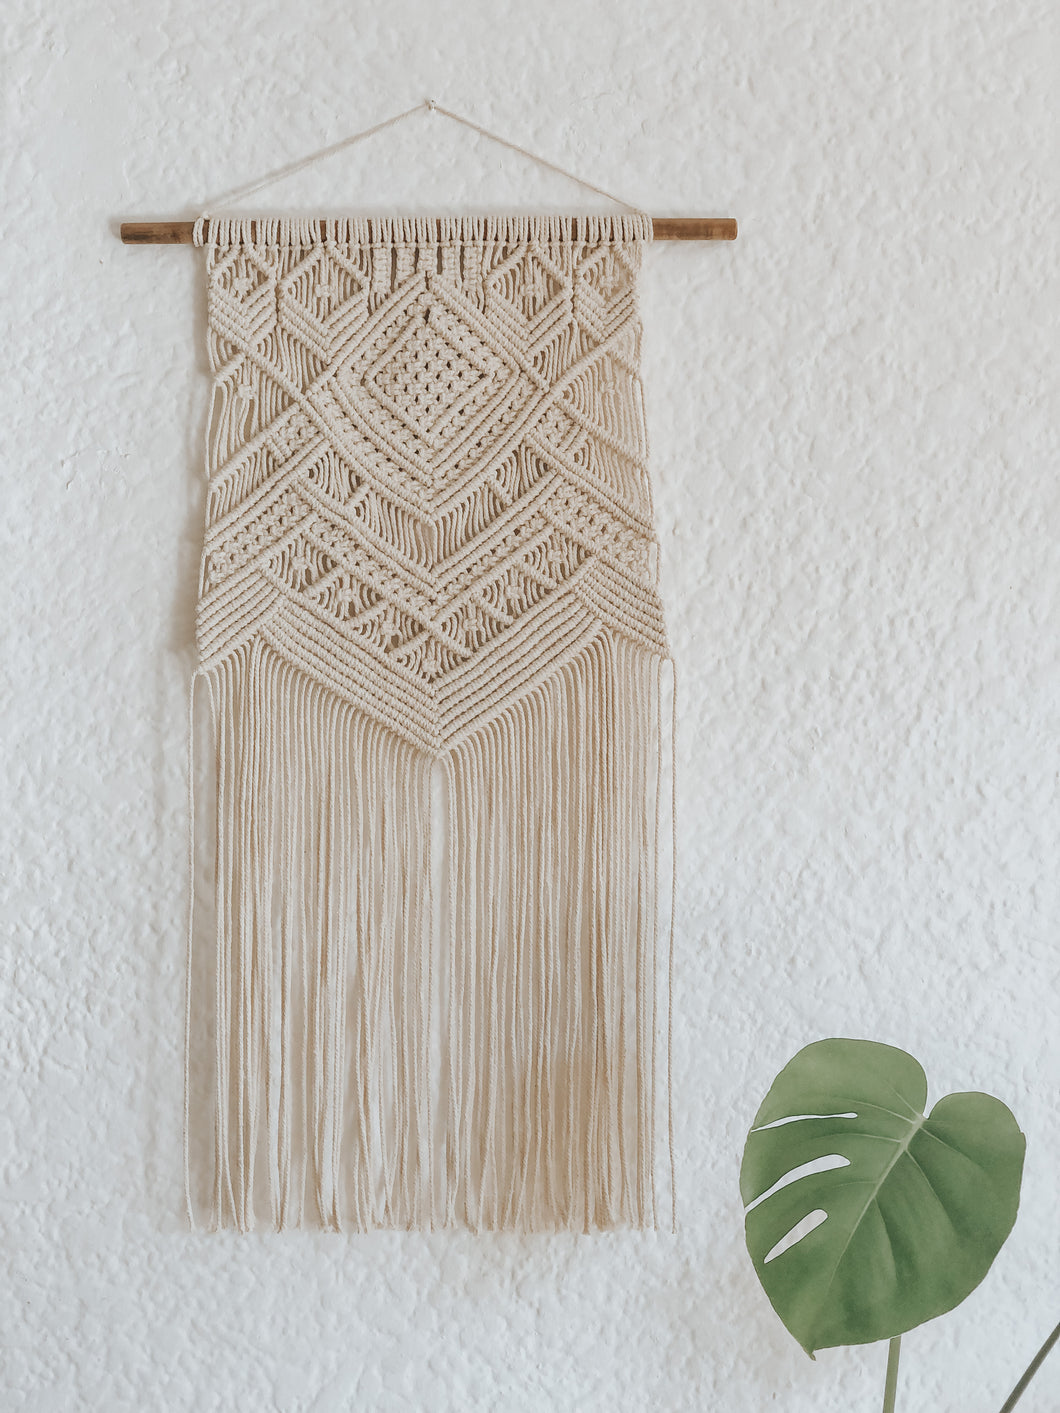 This hanging has a beautifully complex yet simple design, using diagonal double half hitch knots to create texture. Made with natural 3mm cotton rope on a wooden dowel rod.